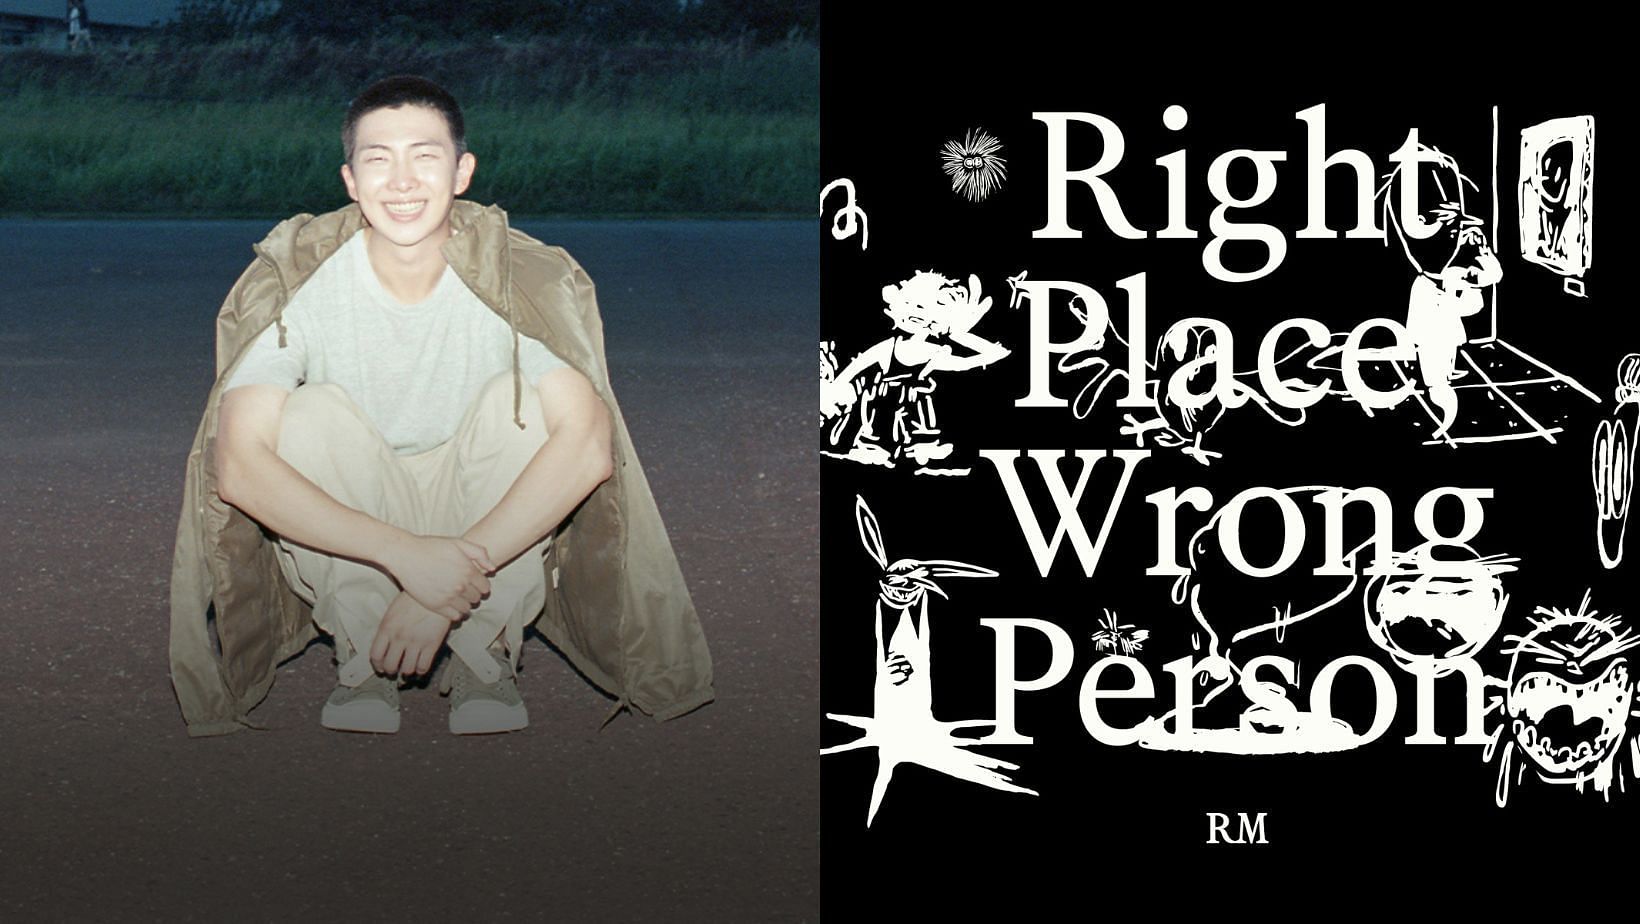 Every BTS solo album to reach top 10 of Billboard 200 explored as Namjoon&rsquo;s &lsquo;Right Place, Wrong Person&rsquo; debuts at number 5. (Image via X/@bts_bighit)